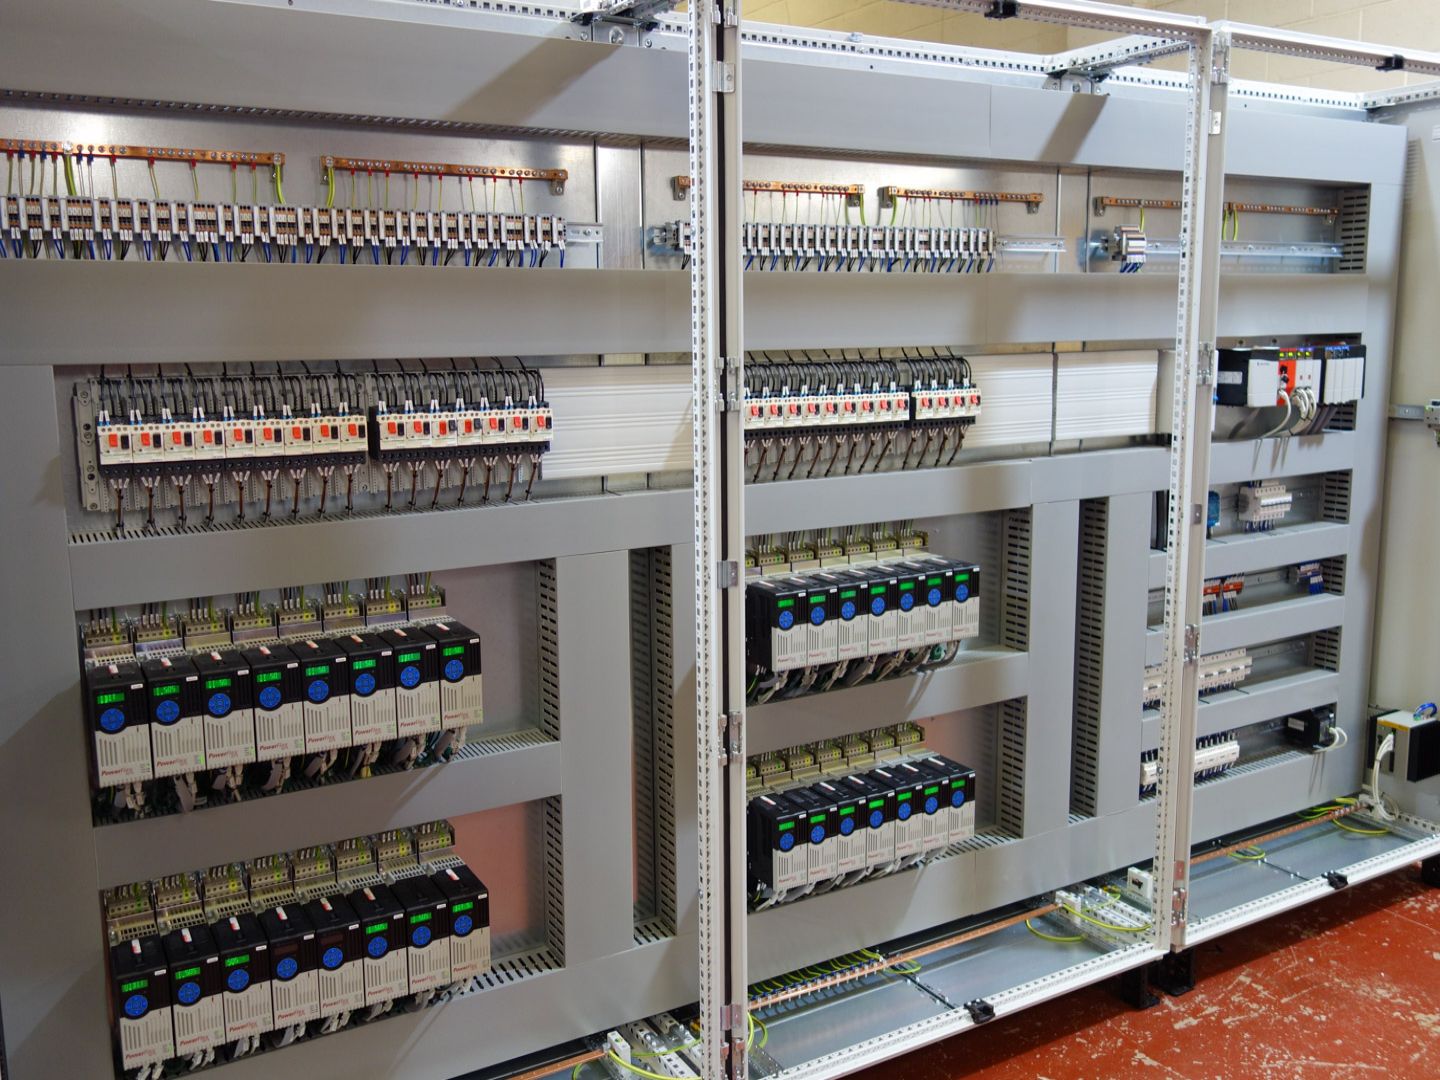 Process control system for an FMCG manufacturer